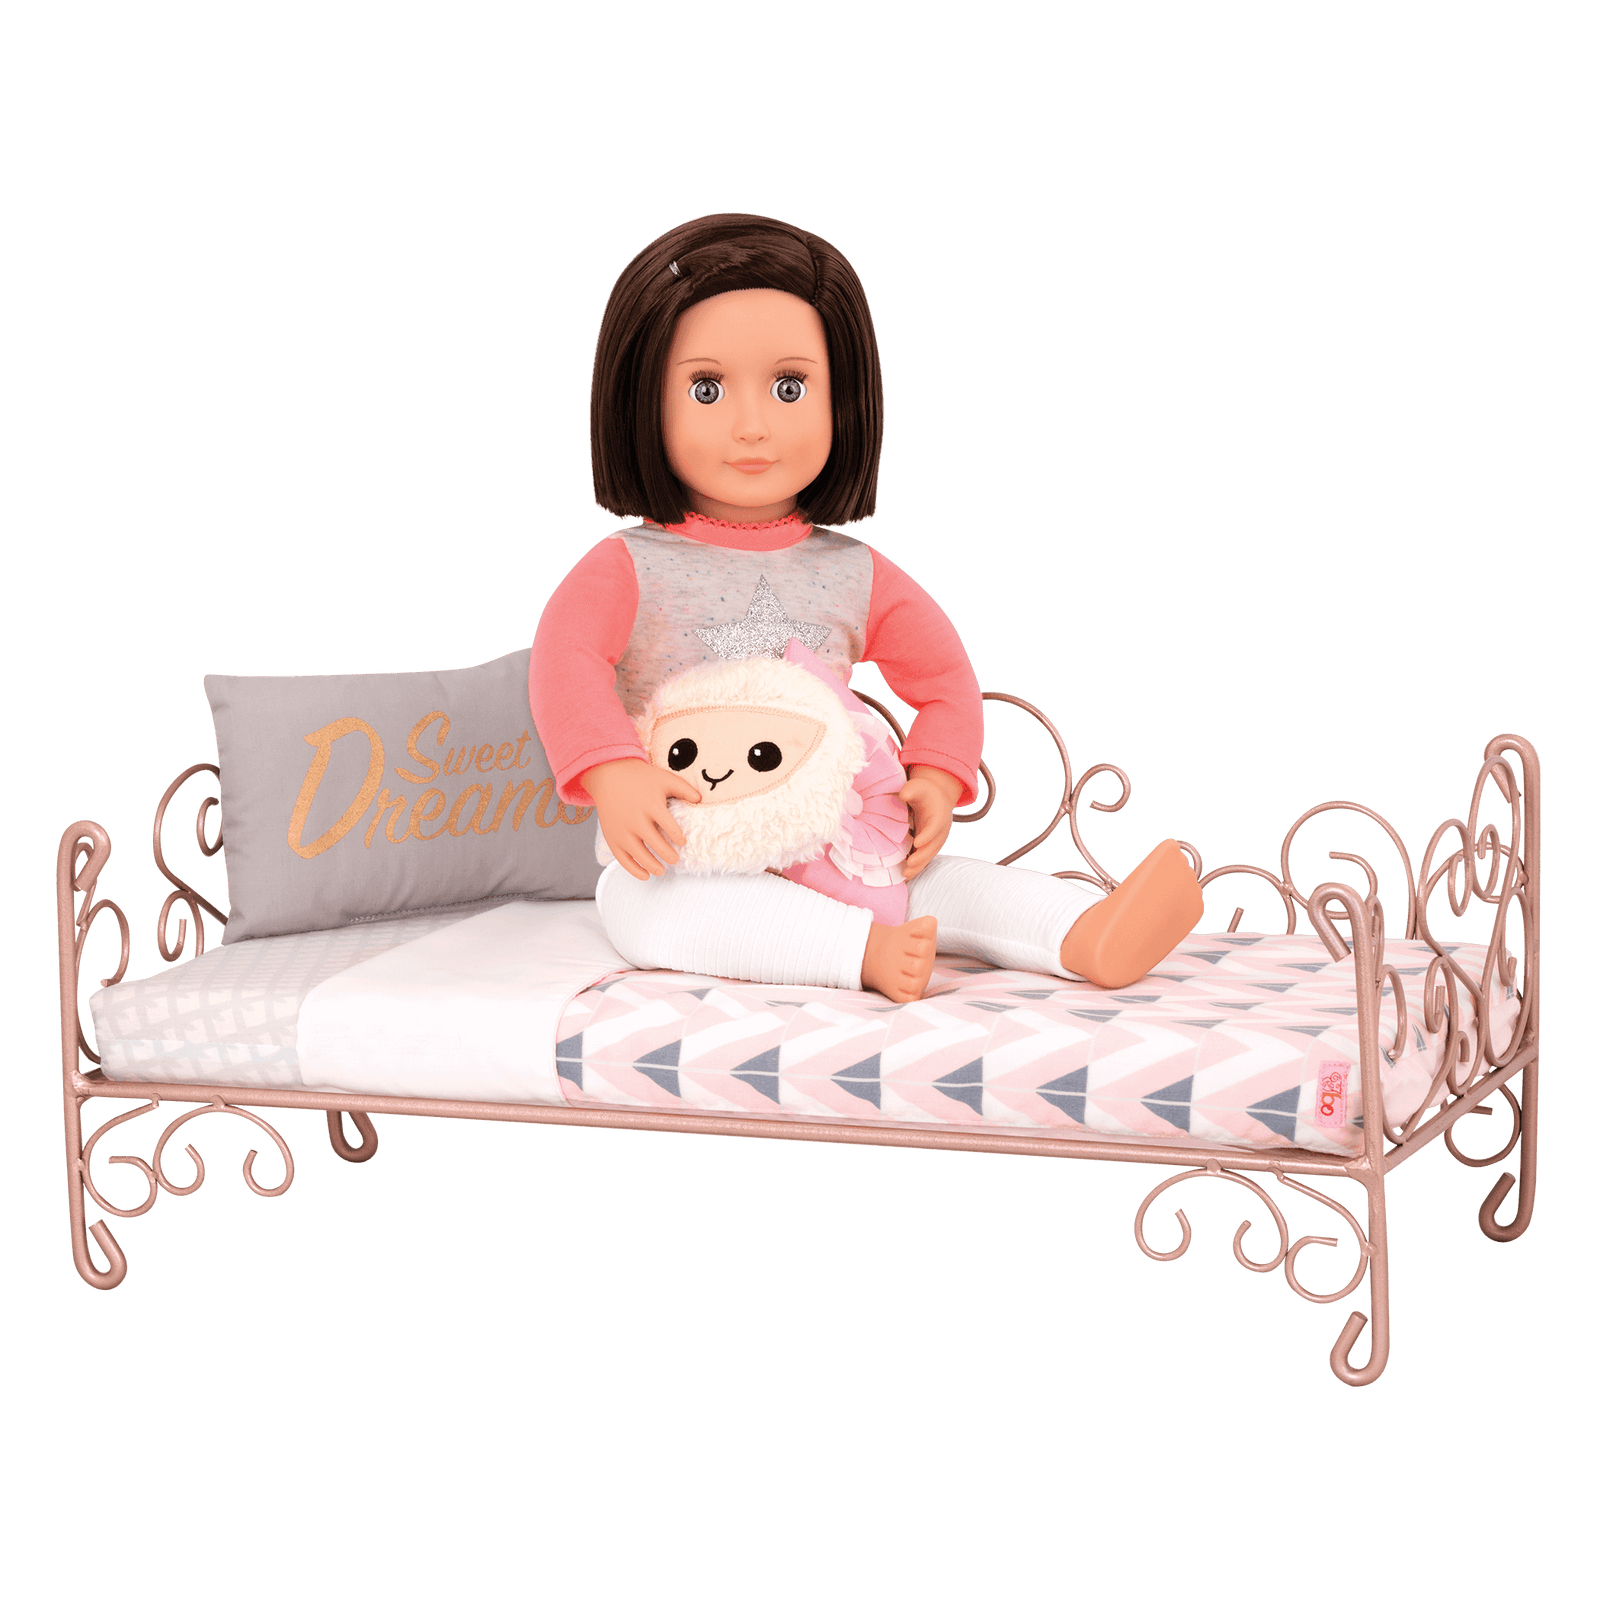 Our Generation: Sweet Dreams Scrollwork Doll Bed